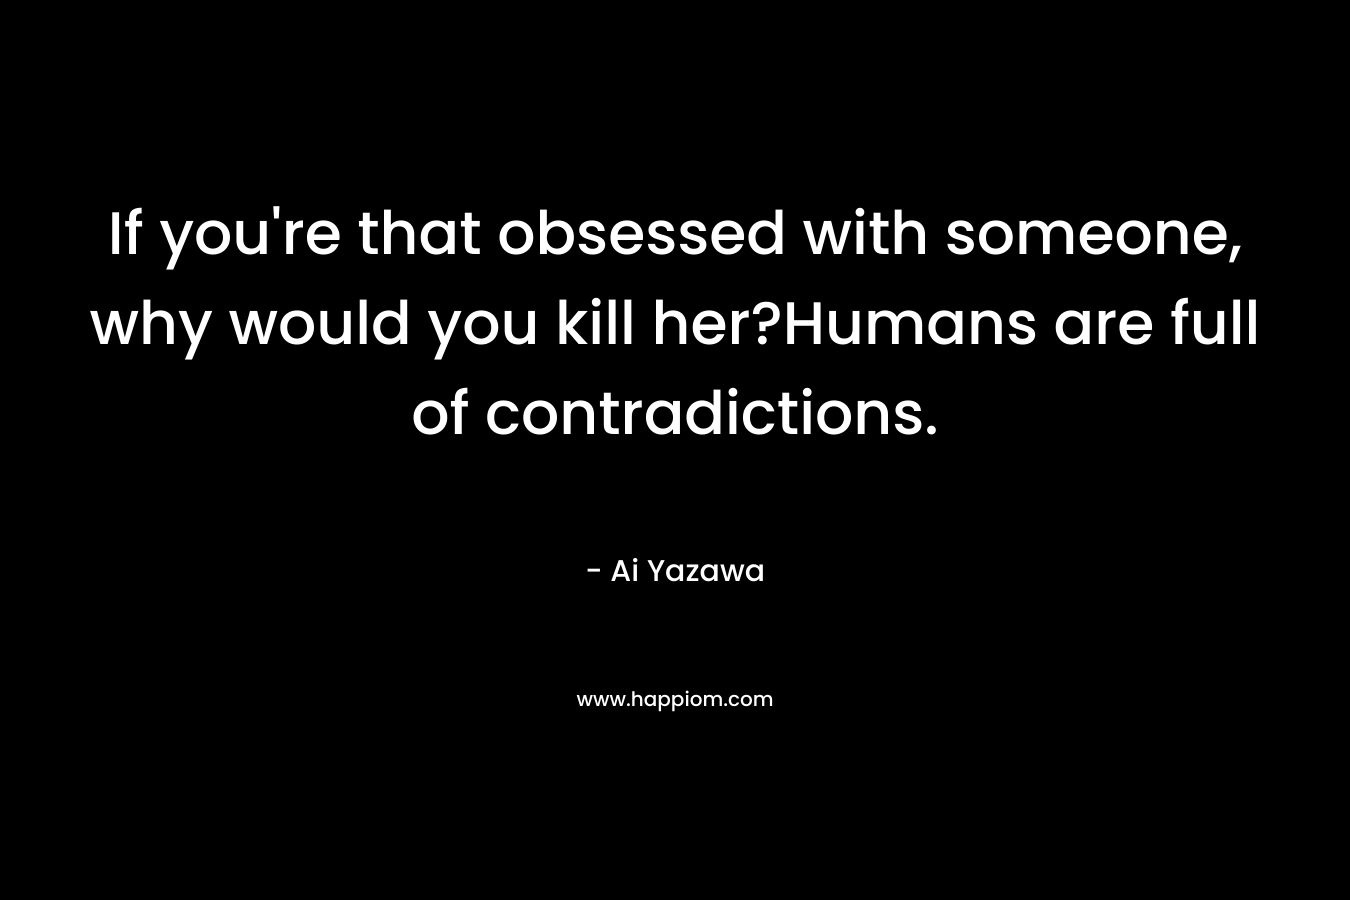 If you’re that obsessed with someone, why would you kill her?Humans are full of contradictions. – Ai Yazawa